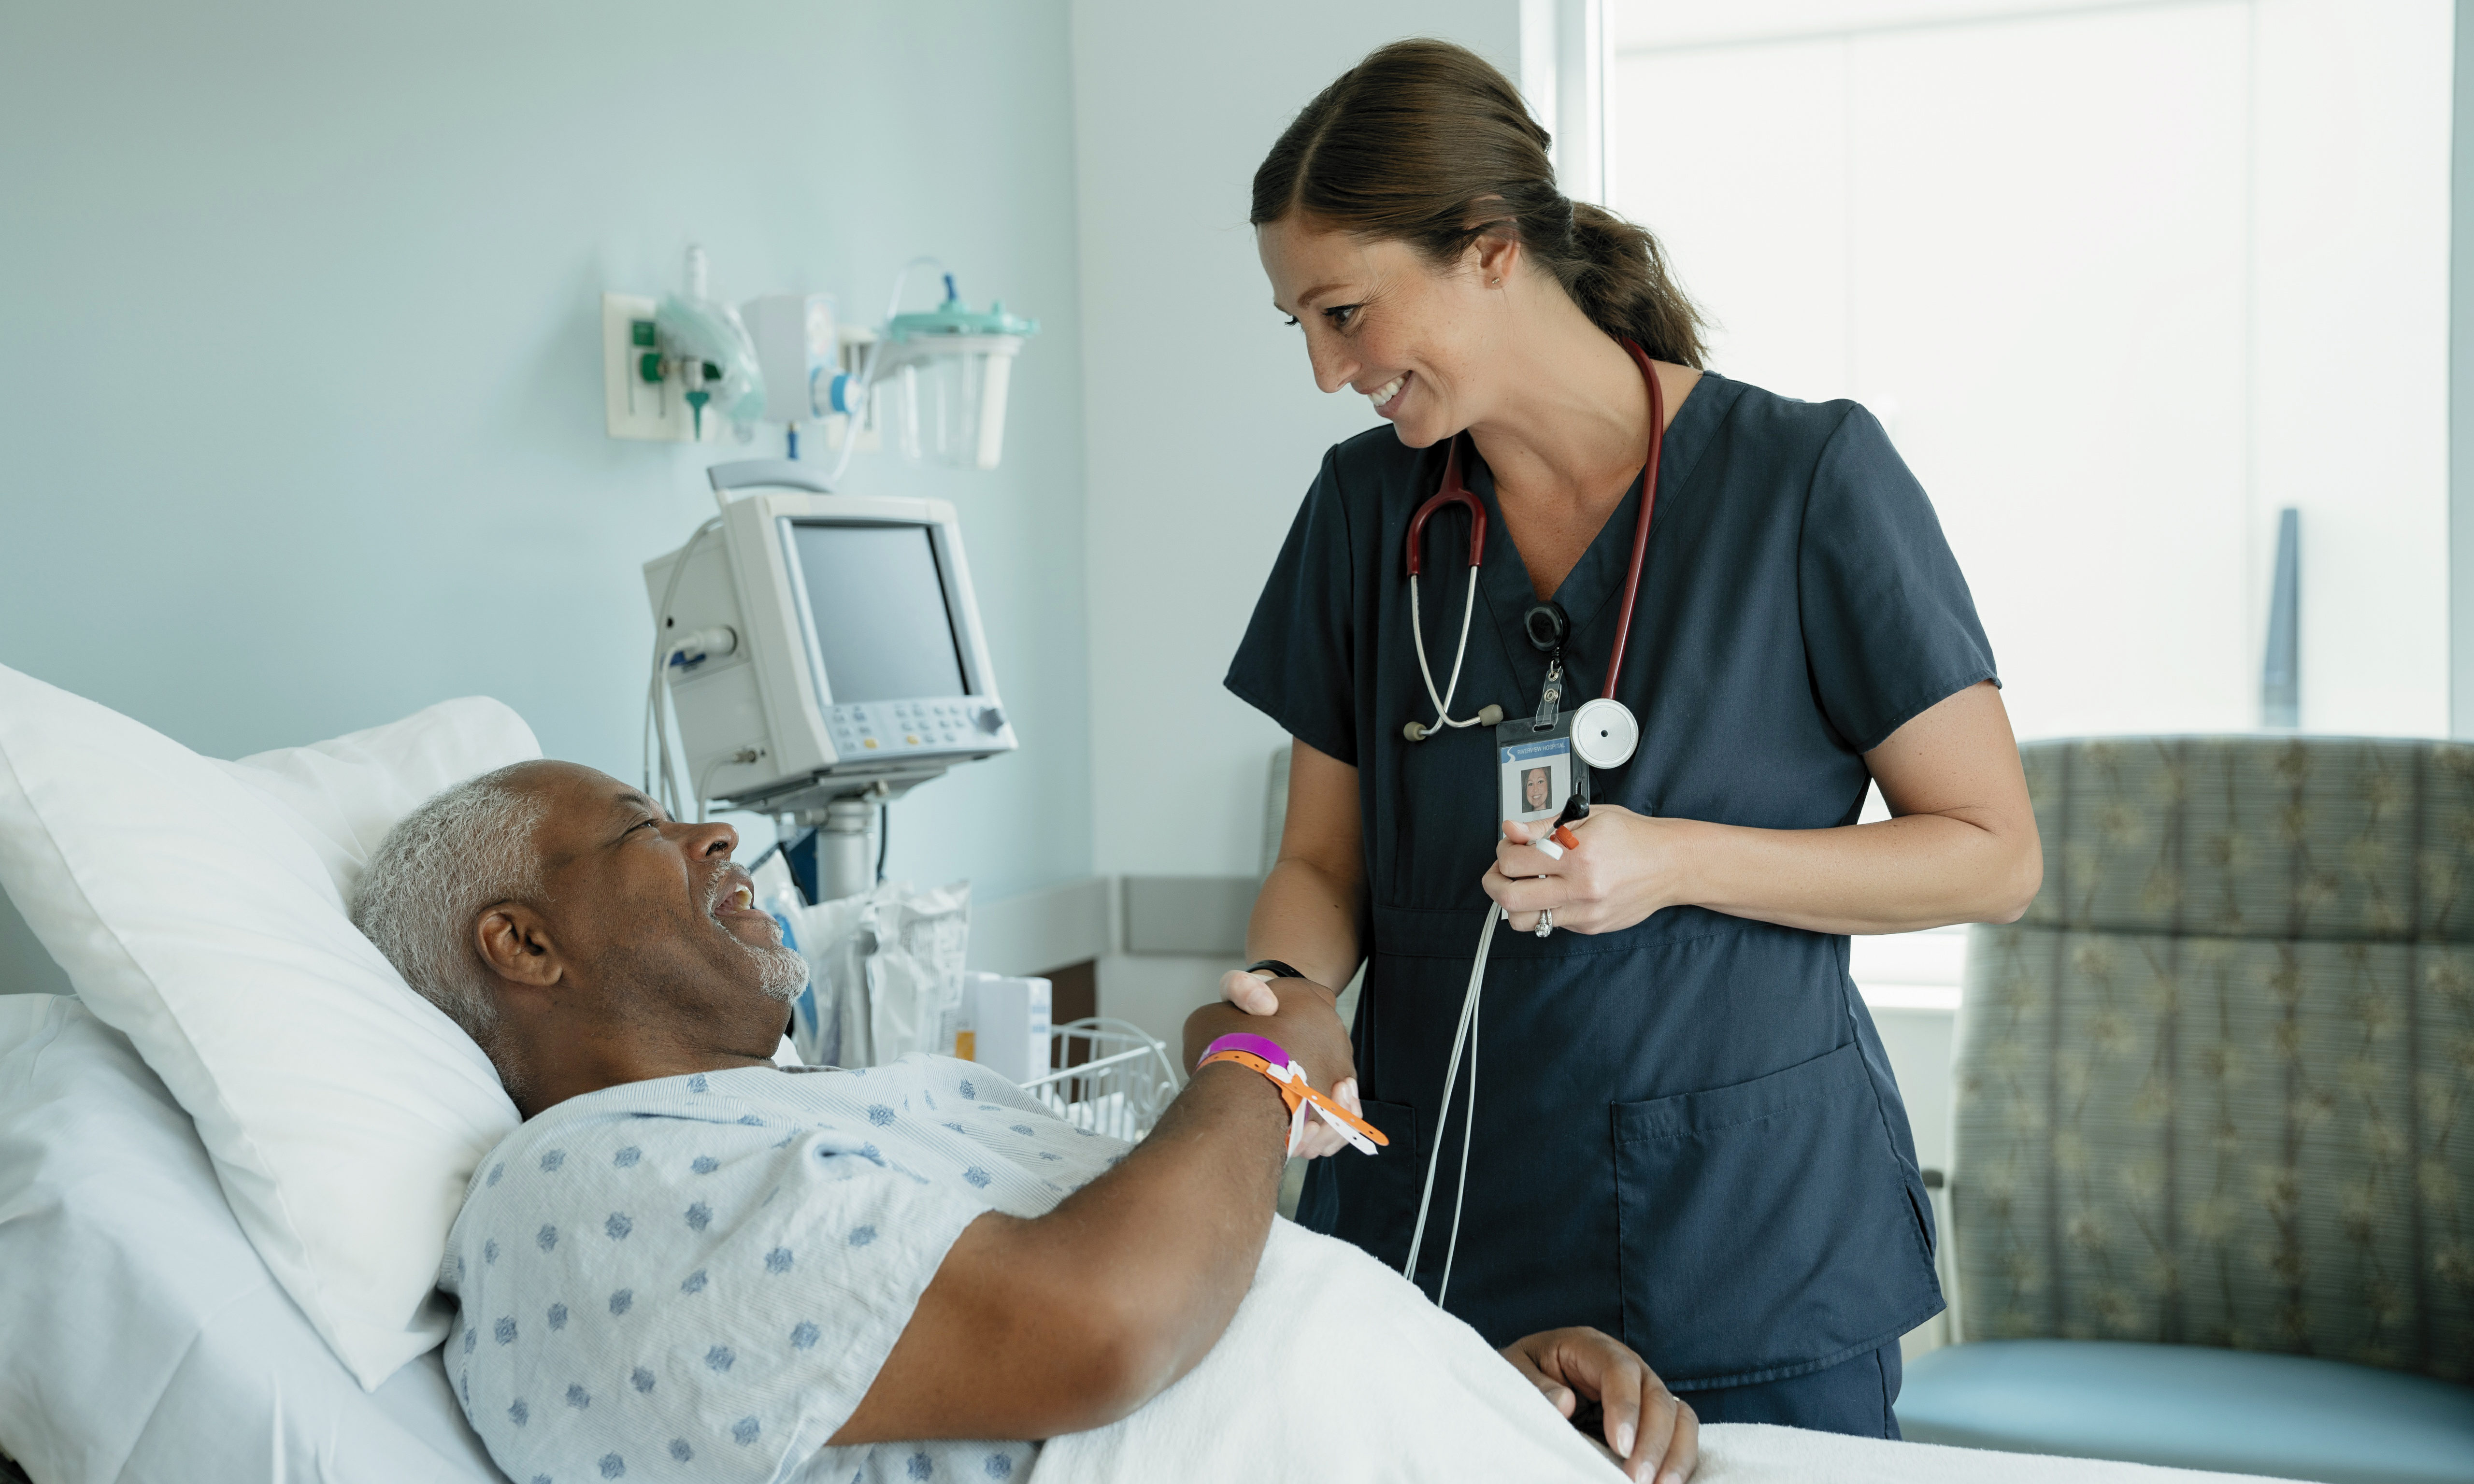 Nurses' Critical – and Often Overlooked – Role in Provider and